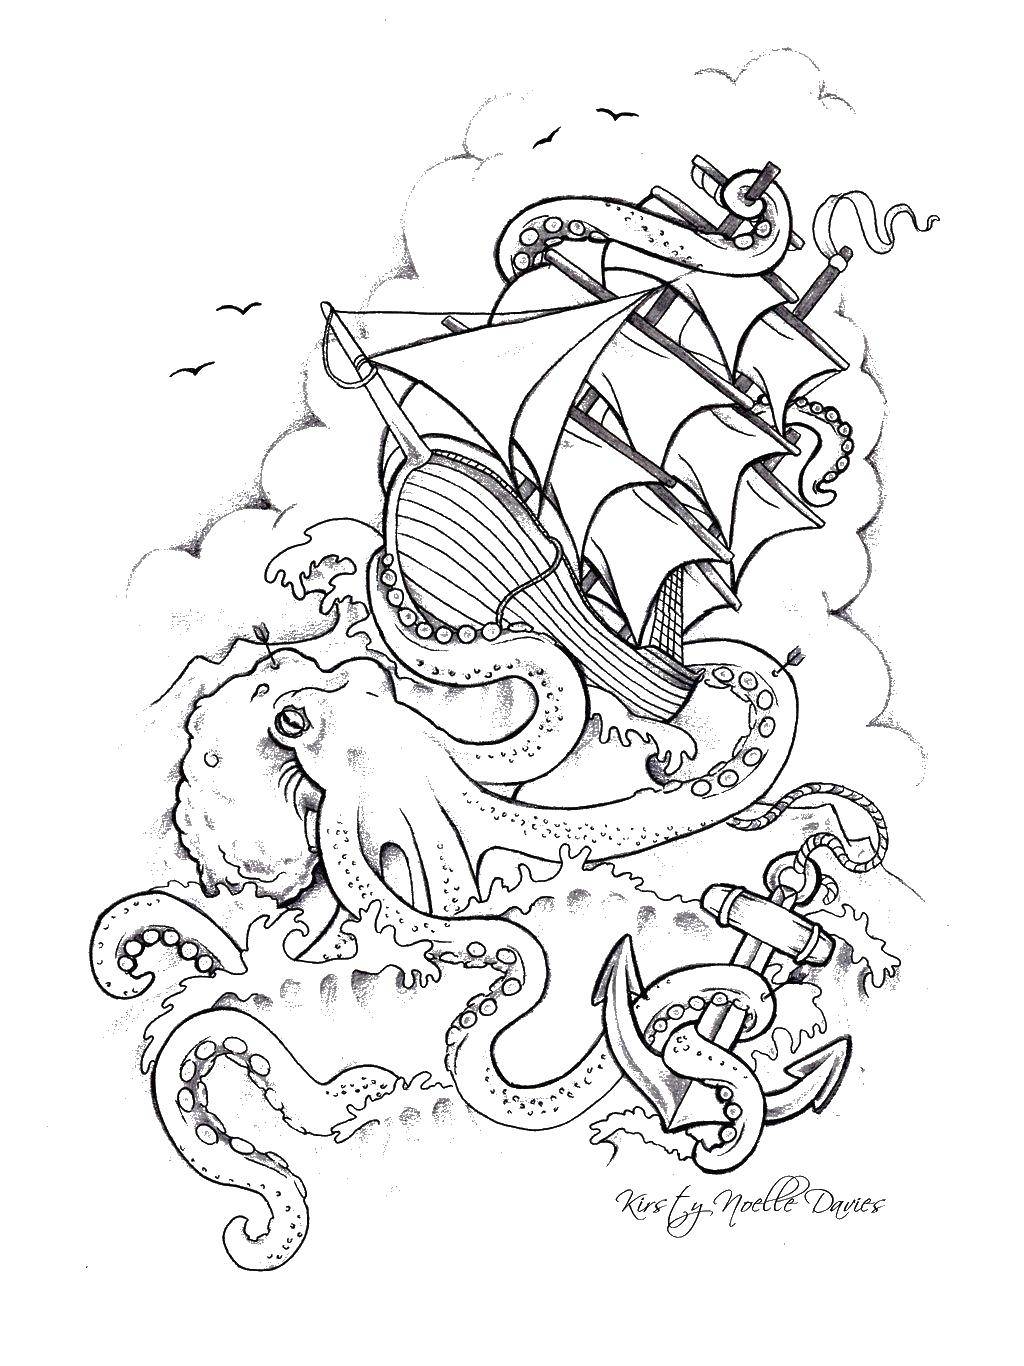 Coloring The ship and octopus. Category coloring. Tags:  ship, octopus, anchor.